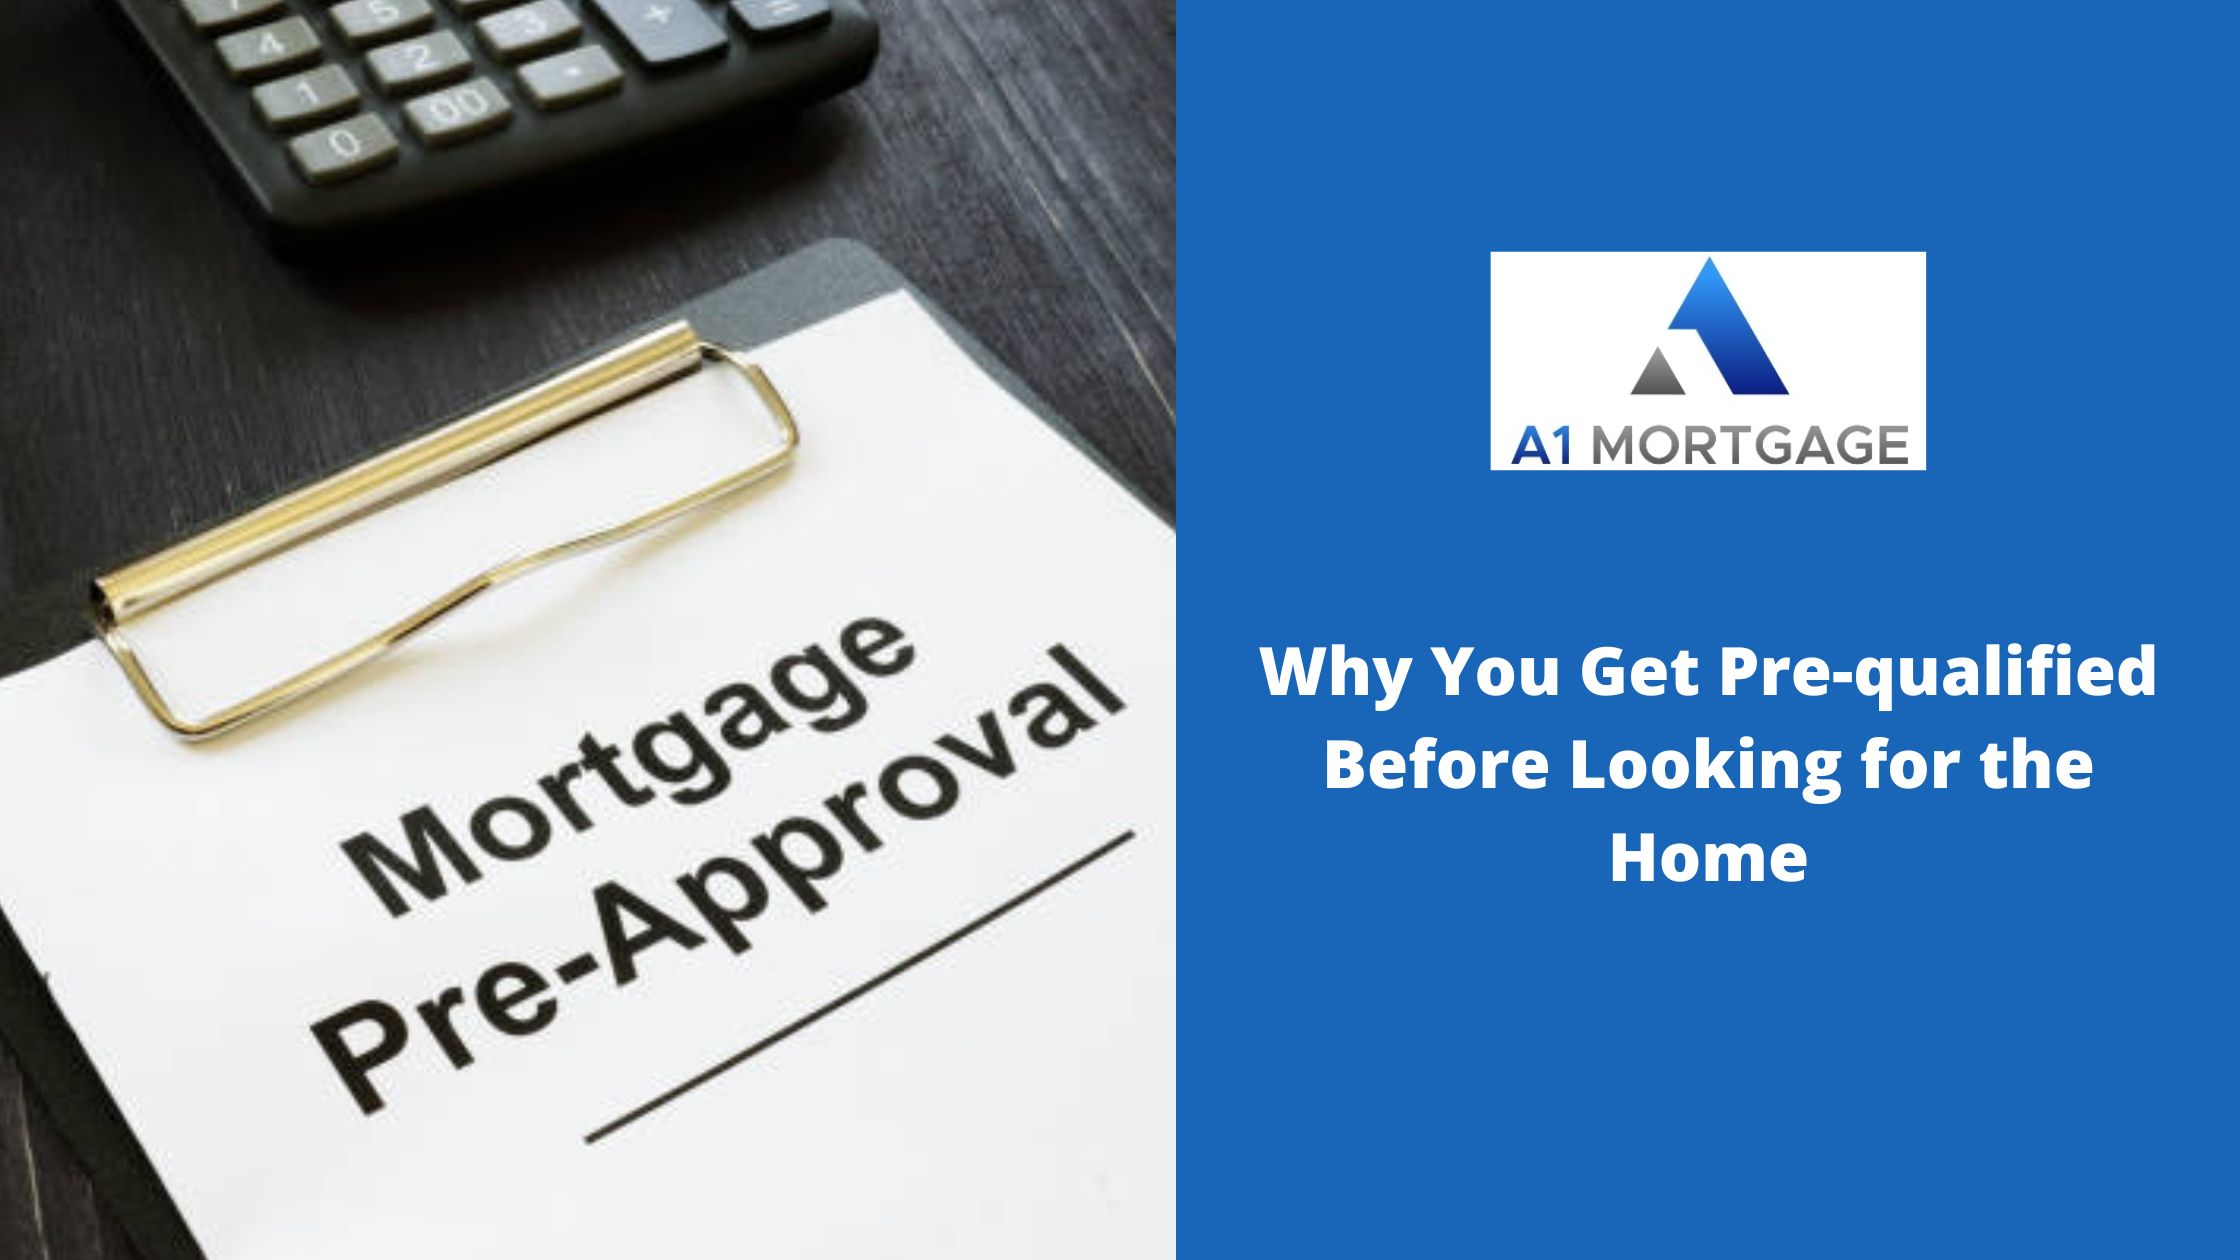 Why You Get Pre-qualified Before Looking for the Home